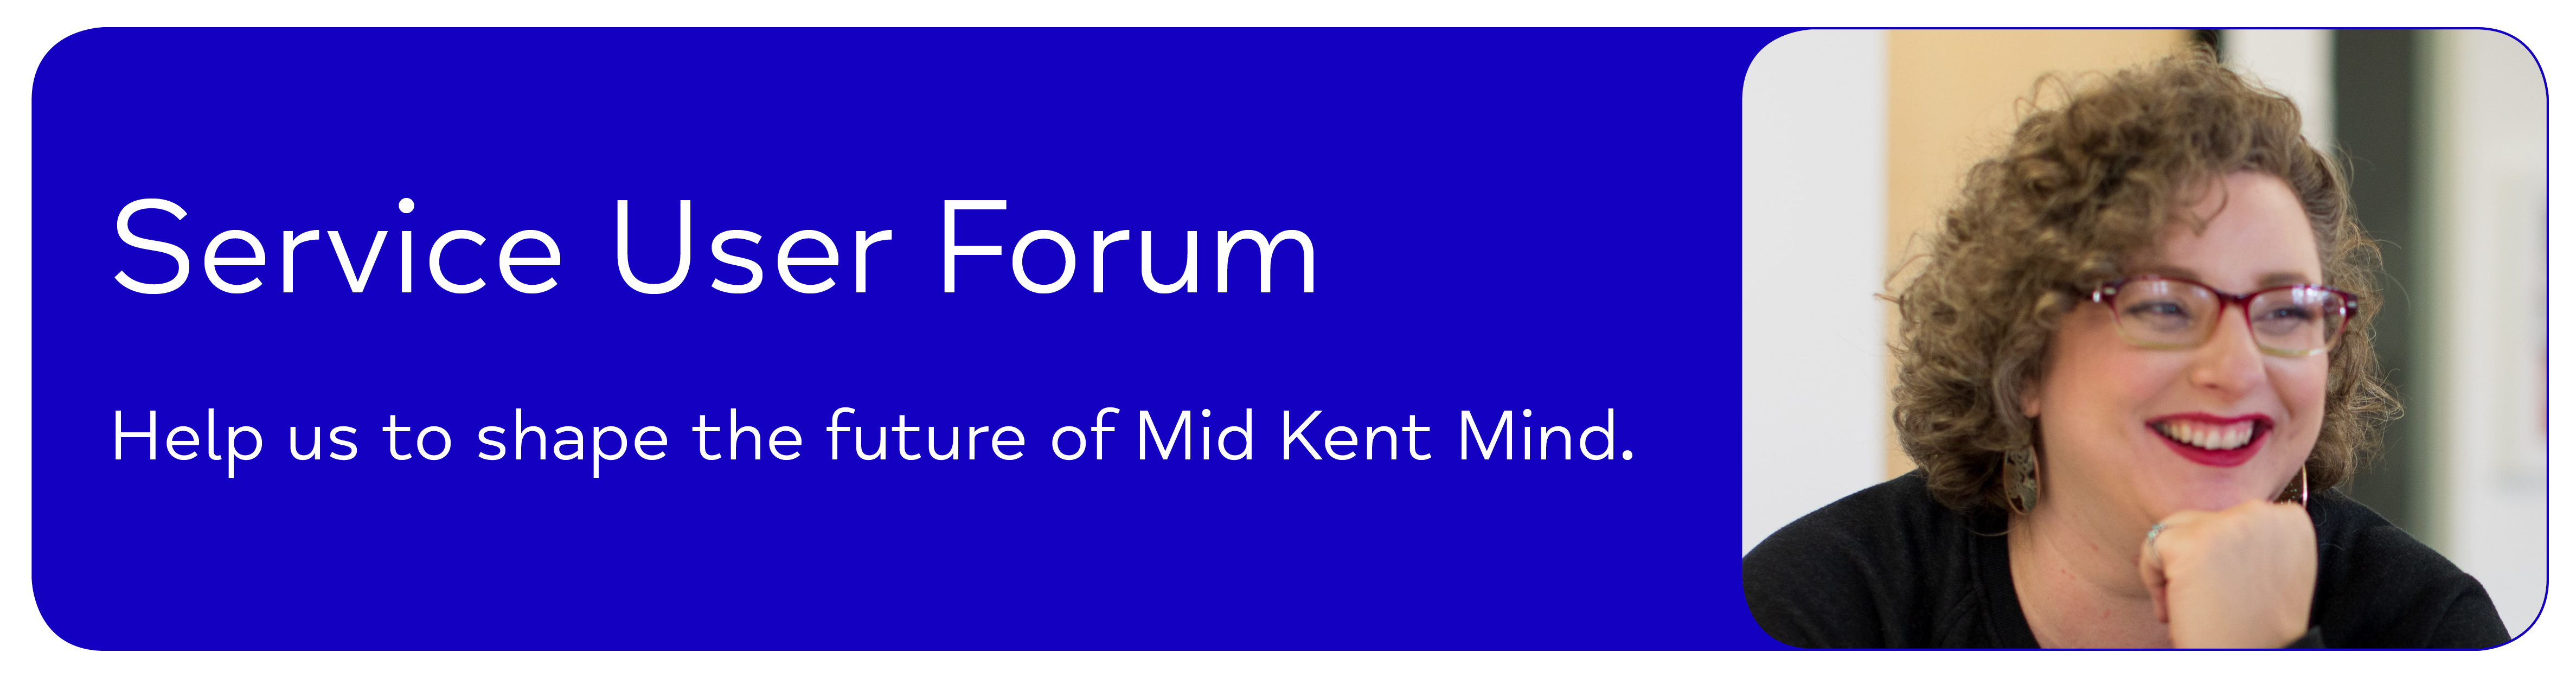 Service User Forum Help us to shape the future of Mid Kent Mind.